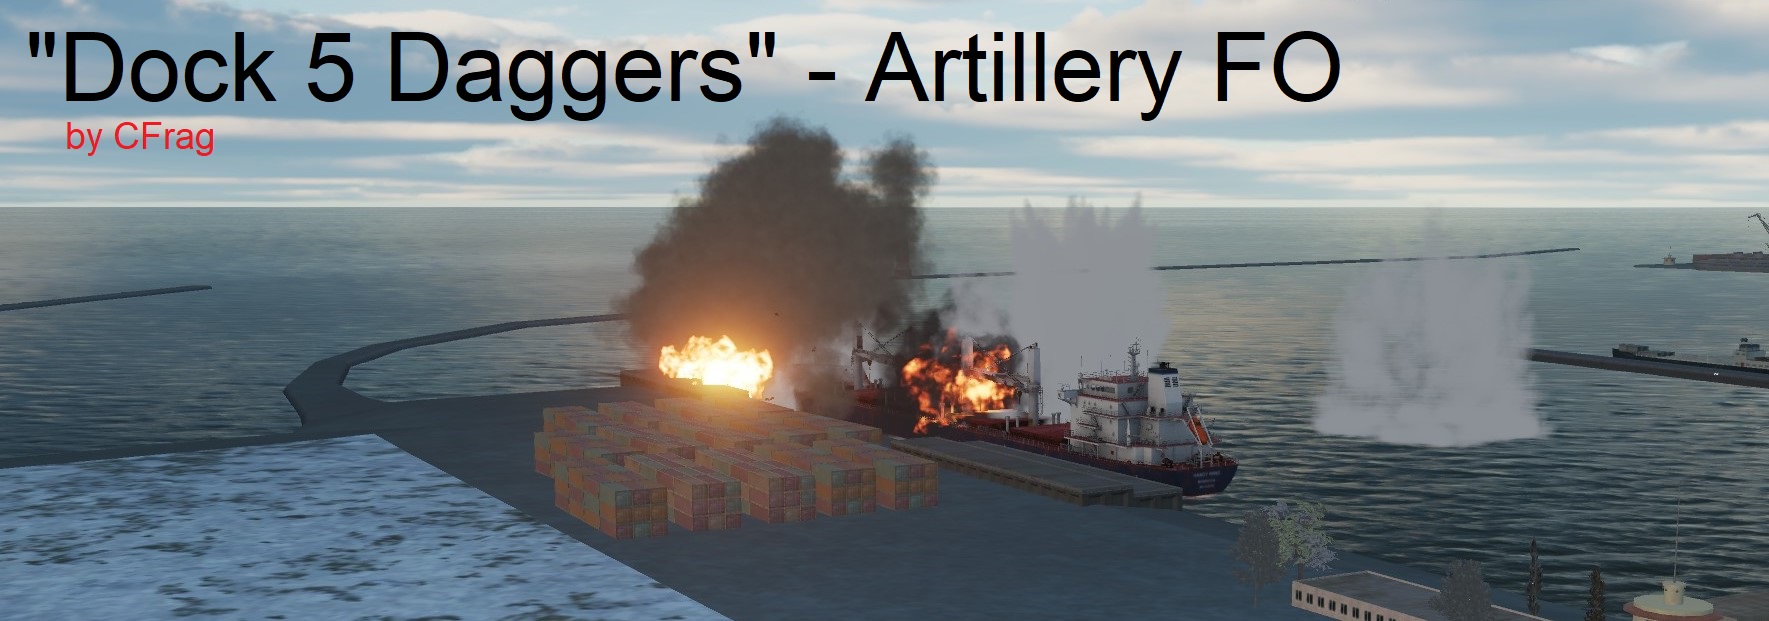 Dock 5 Daggers -- Attack Helicopter / Artillery FO (Single / COOP Multiplayer) -- Hind, Apache, Gazelle, Shark (2/3)